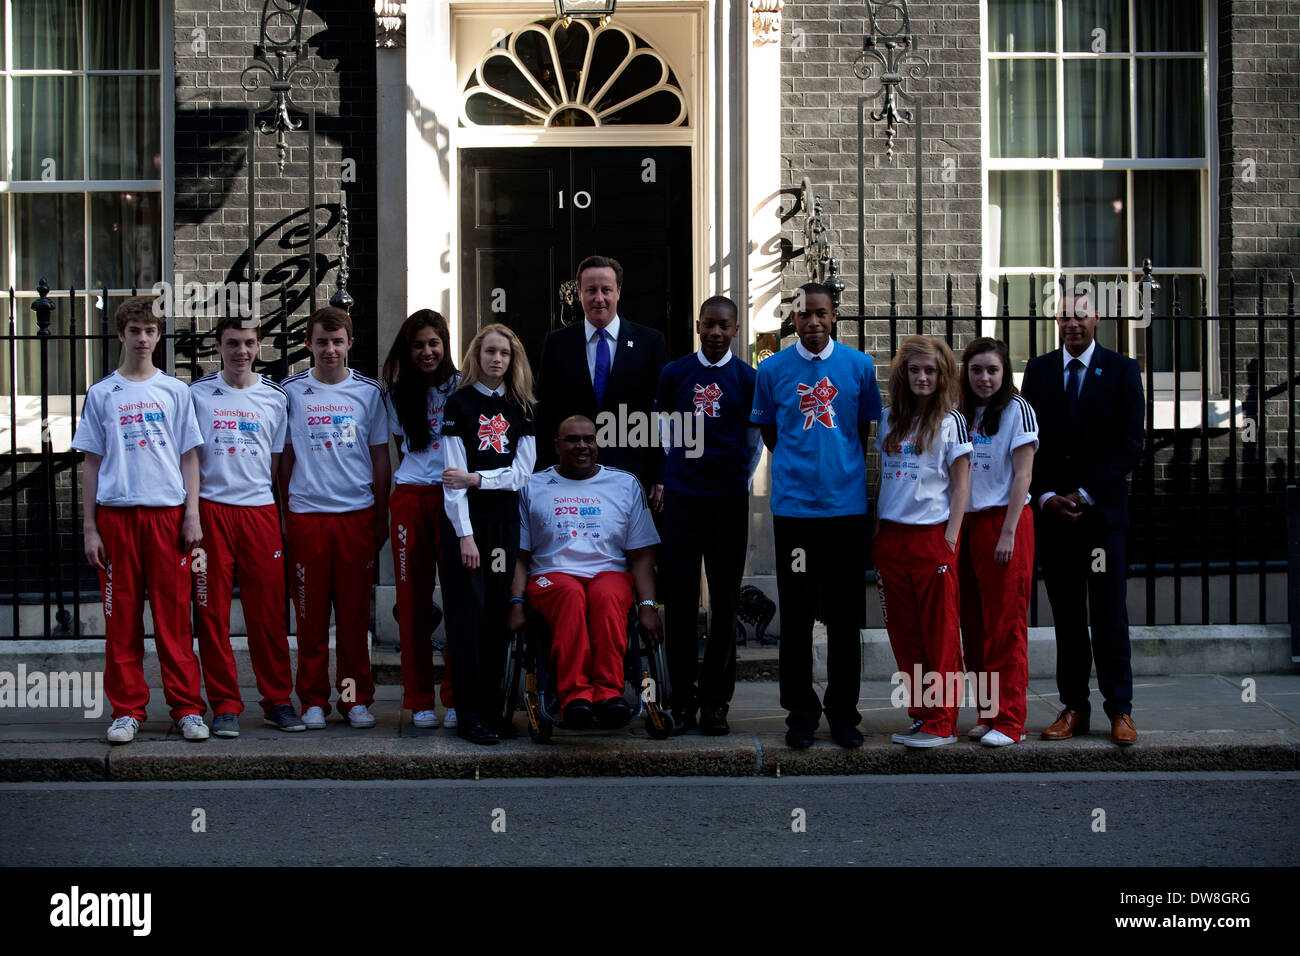 City of London Academy pupils and young British Badminton athletes pose with Prime Minister David Cameron outside Downing Street on March 28, 2012 in London, England. The young athletes will compete in the finals of the School Games later this year, which is a mirror version of the Olympics for young people. (Photo by Tal Cohen) Stock Photo